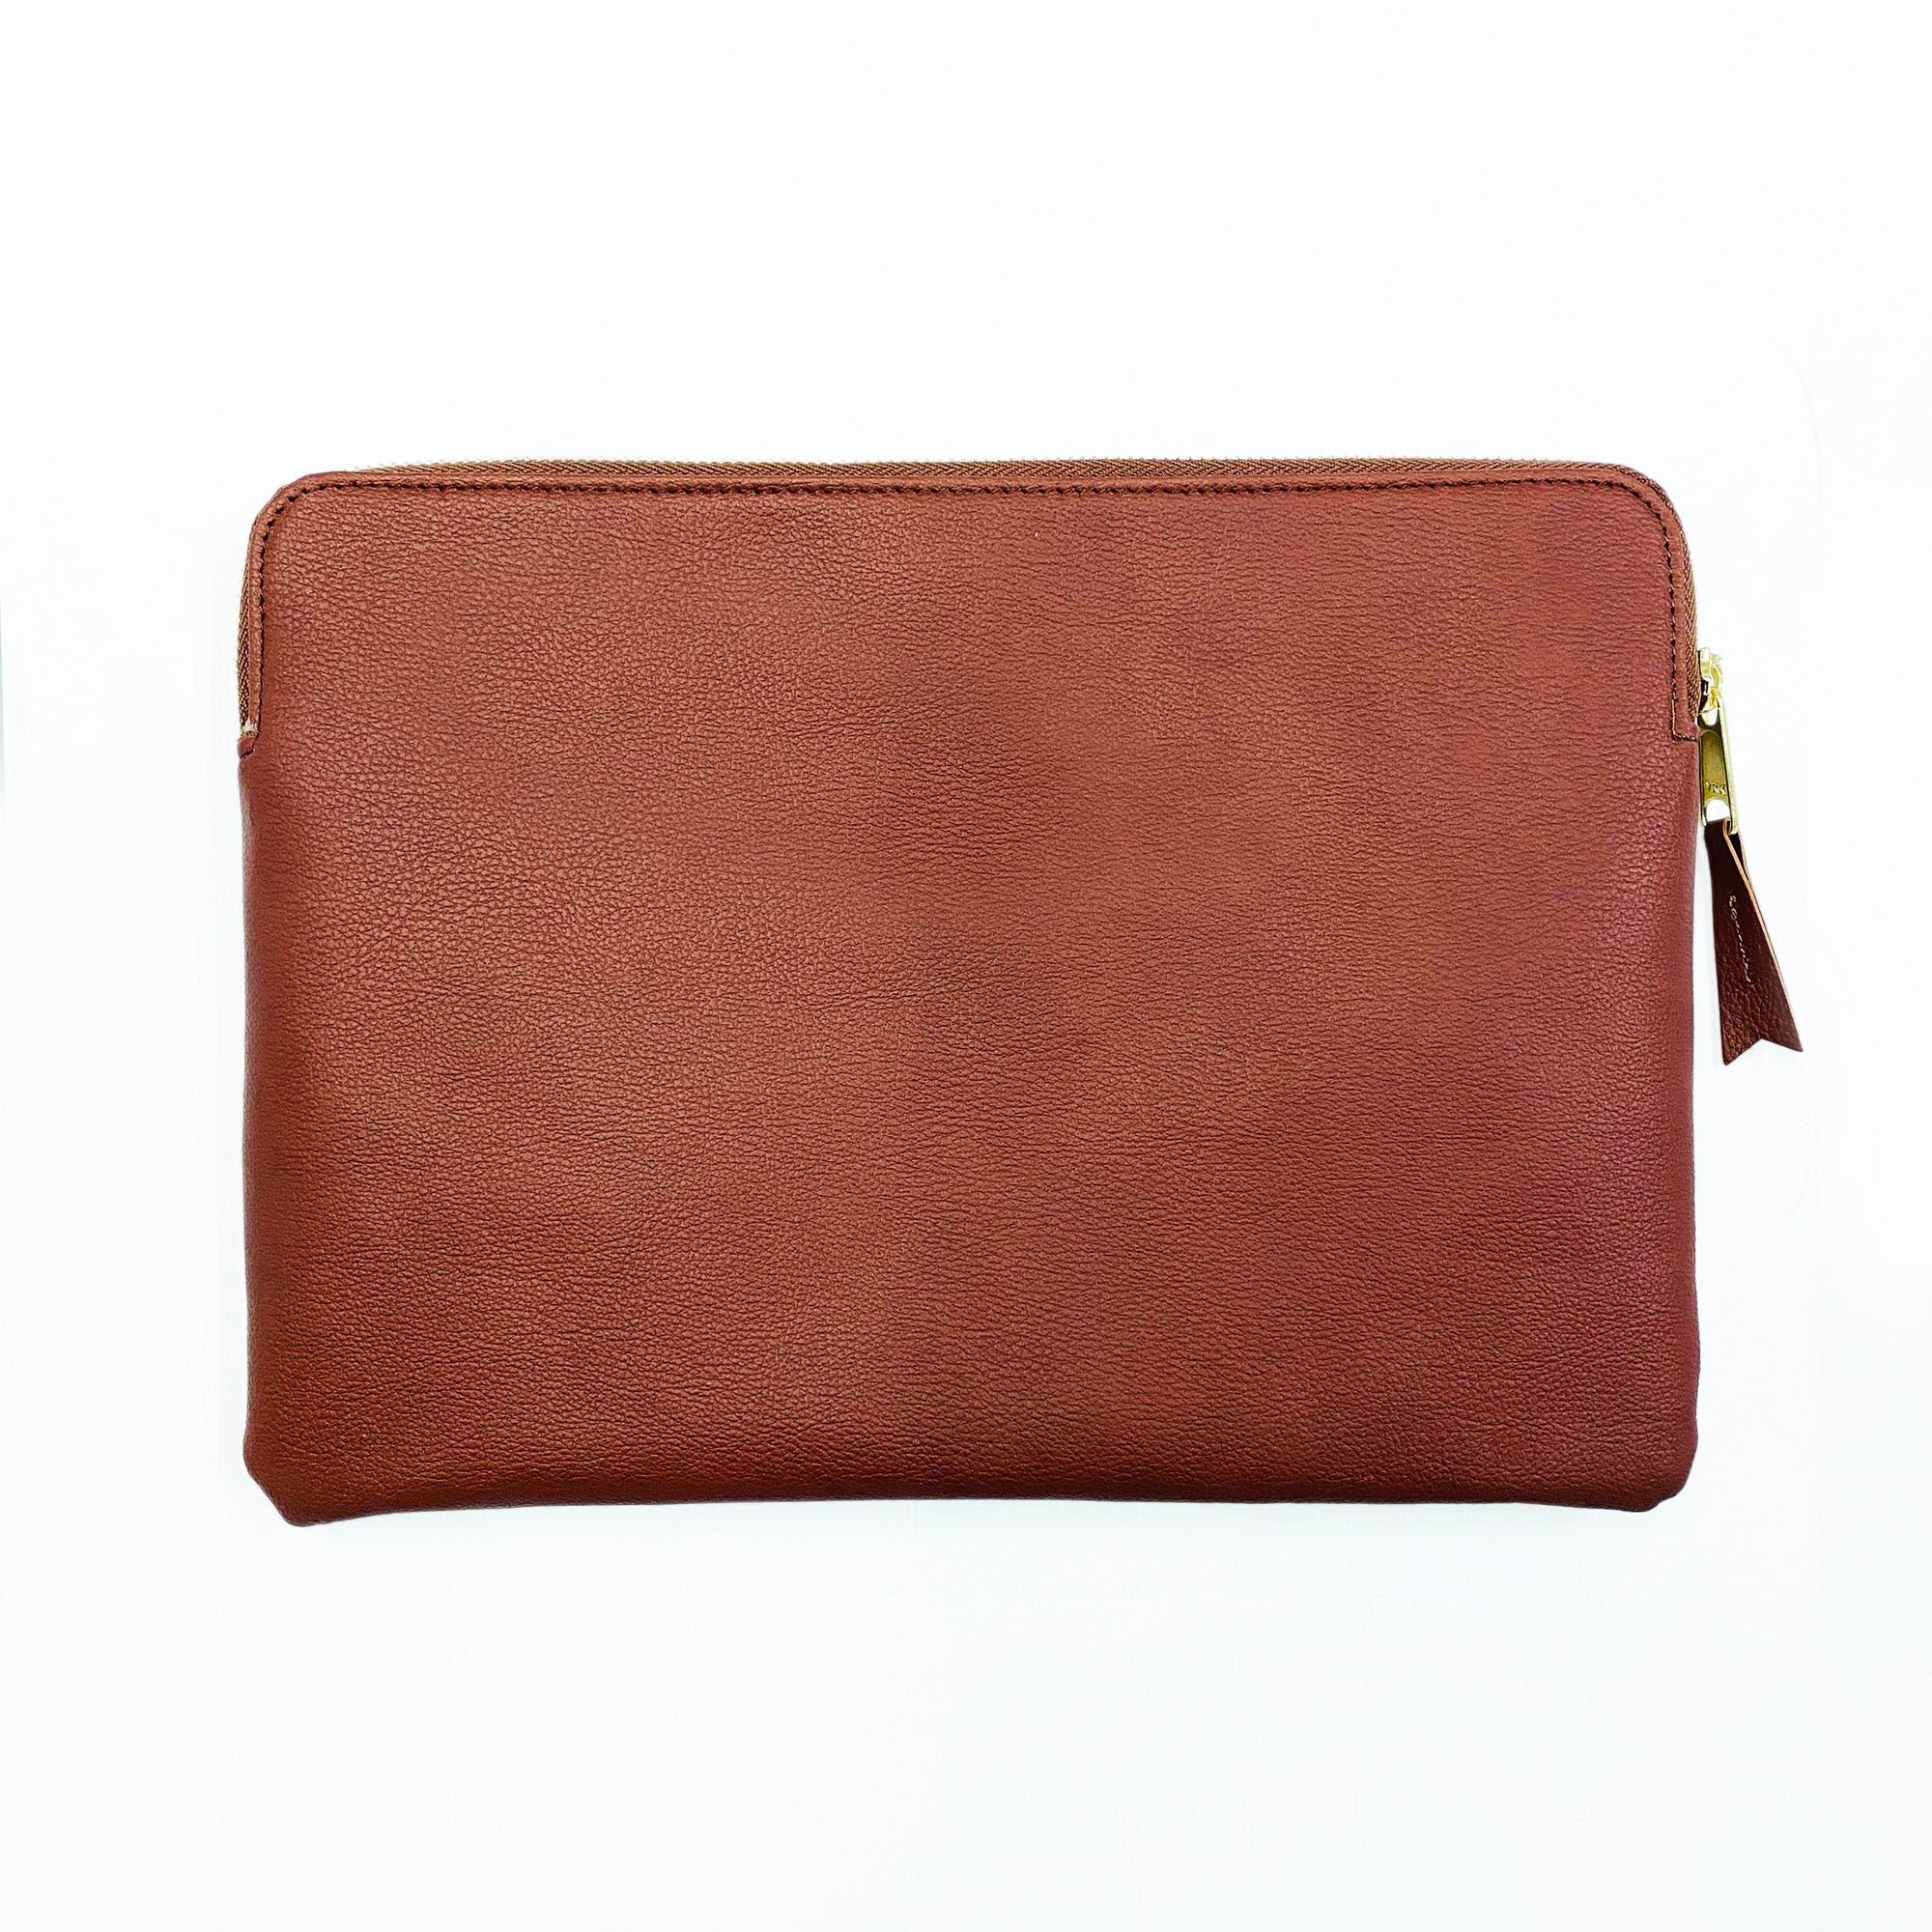 Brown Tablet sleeve with zipper closure 